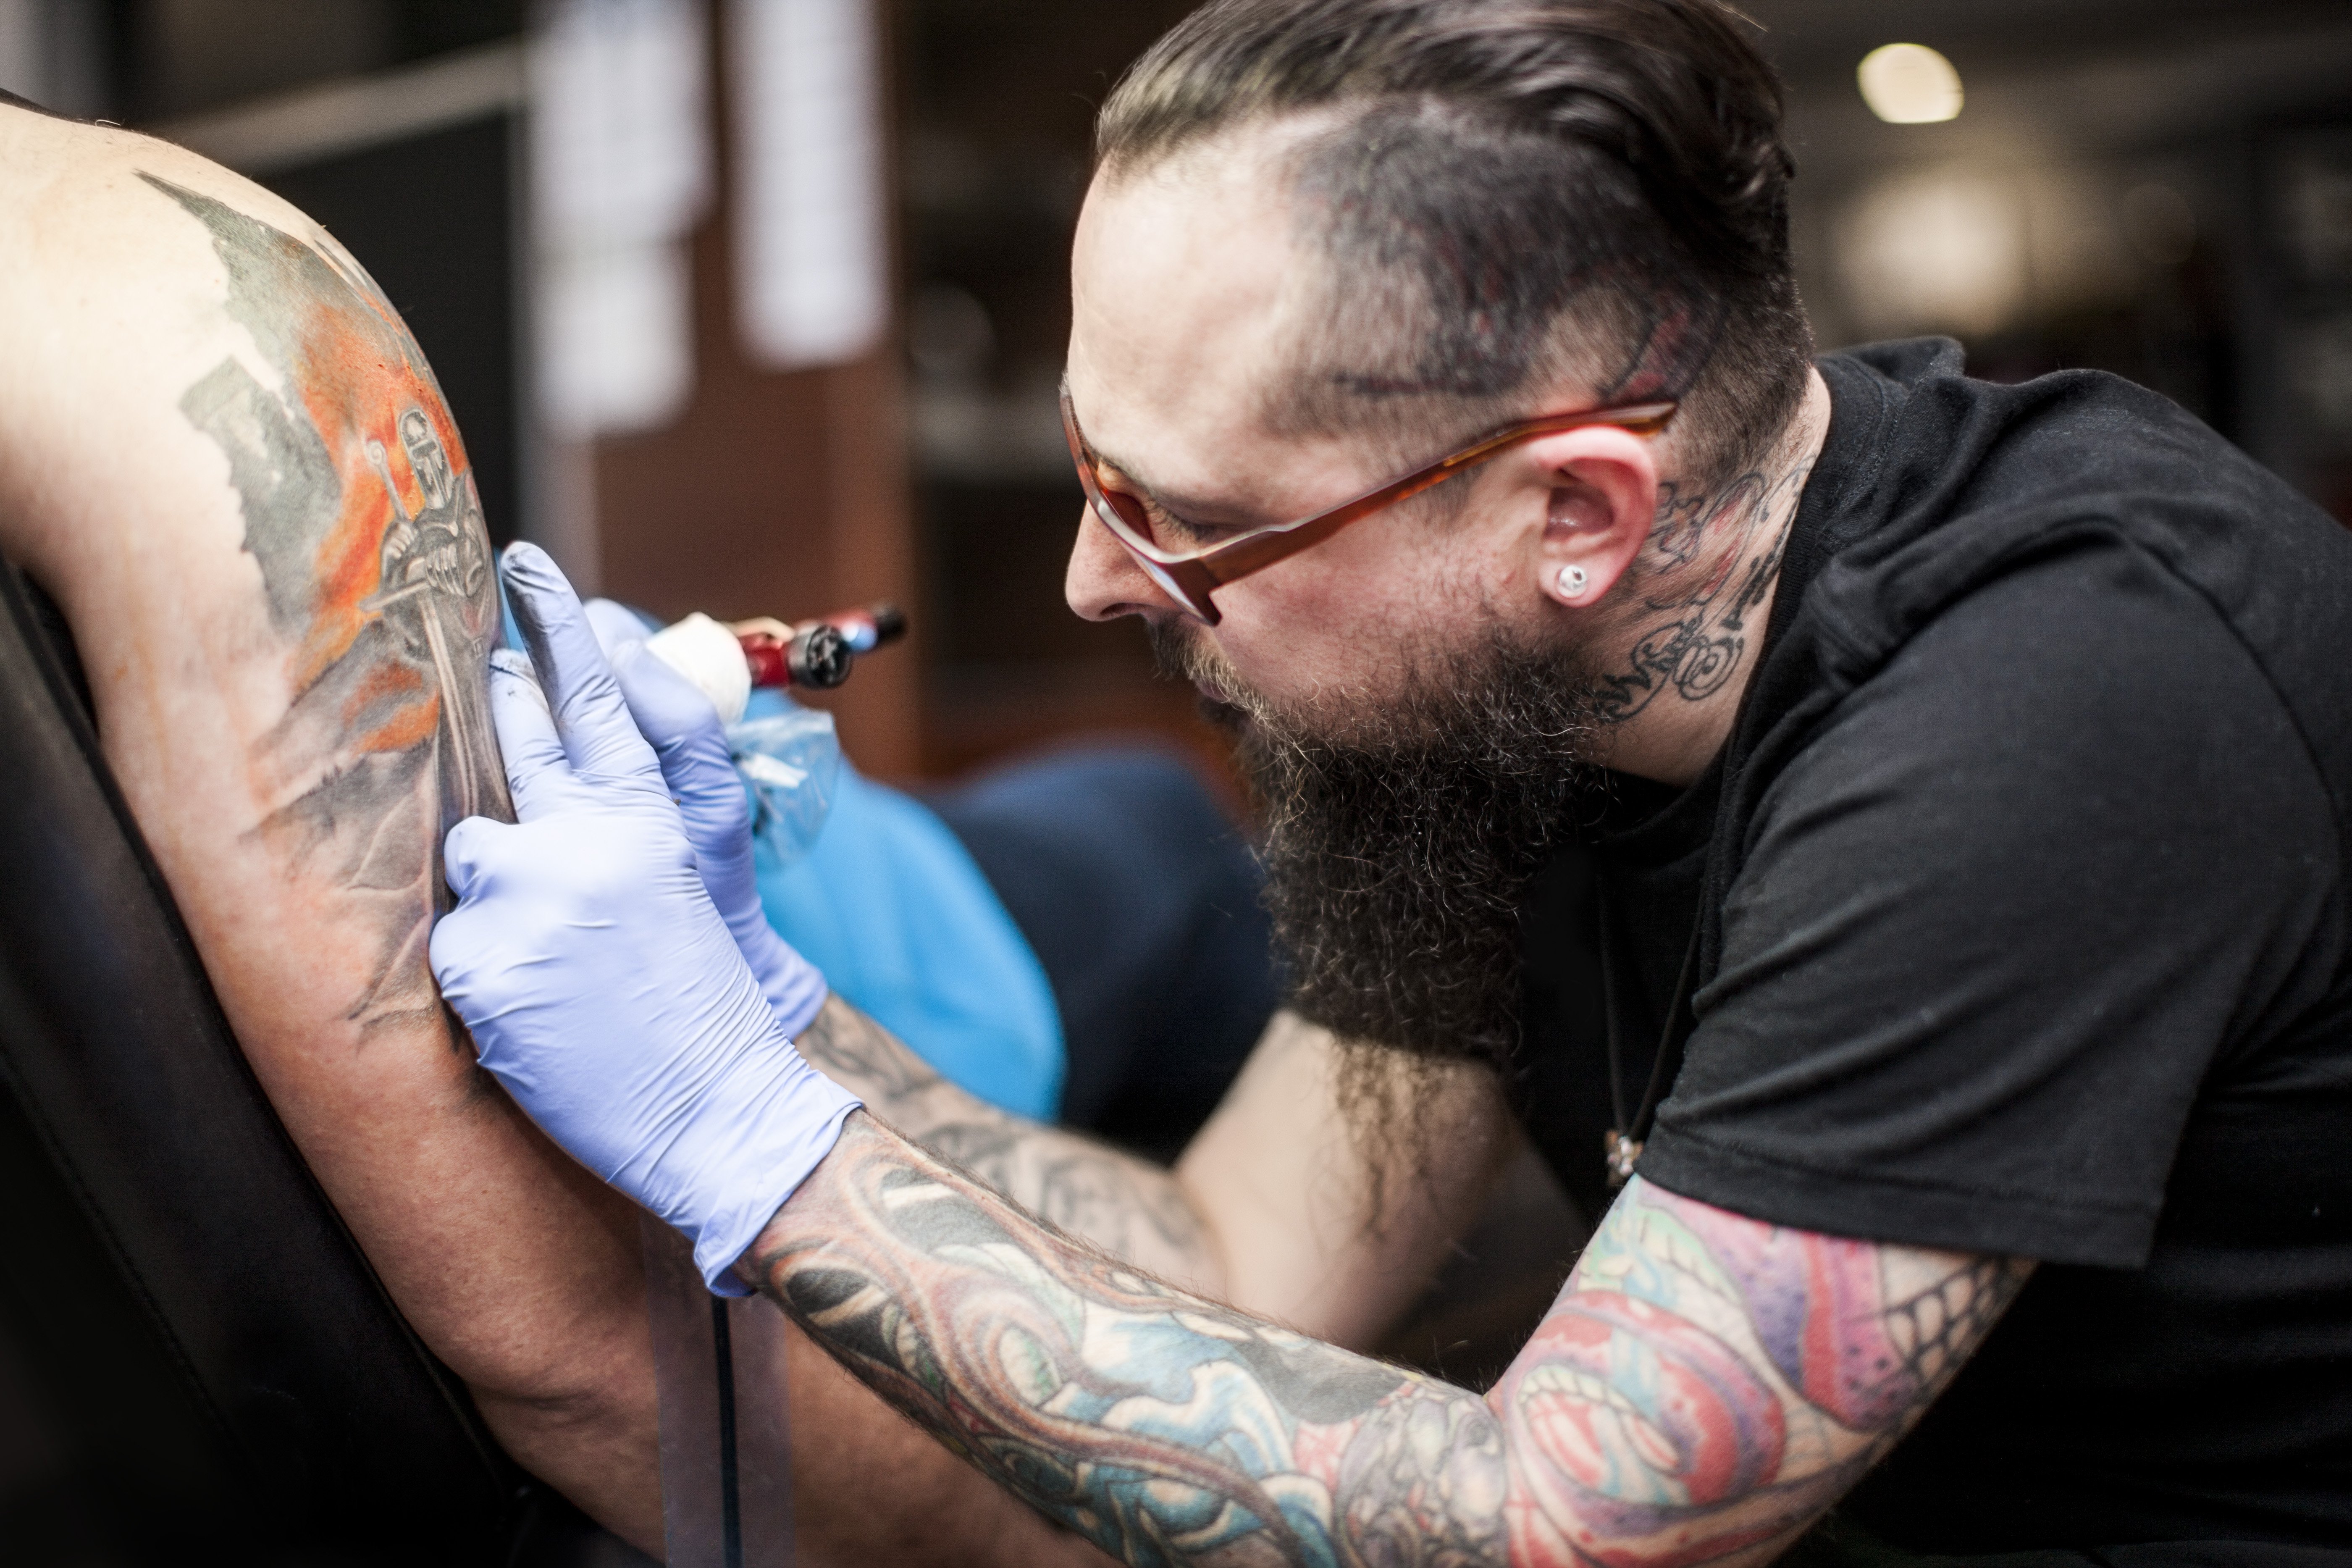 A tattoo artist at work | Source: Getty Images